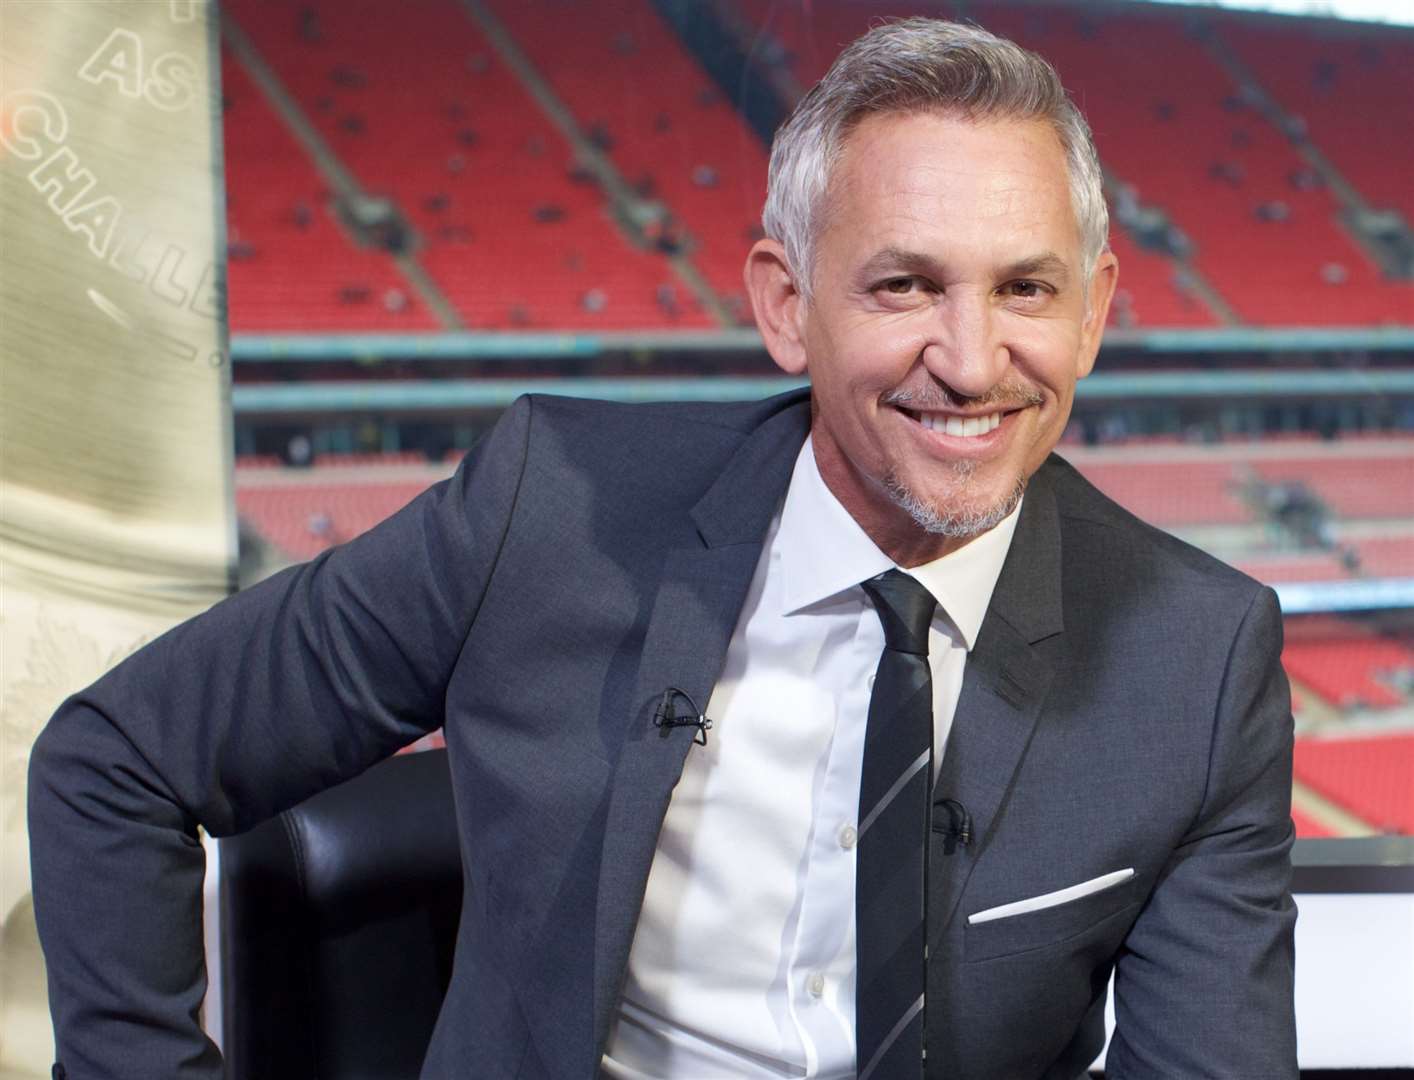 Gary Lineker will not present this evening's Match of the Day. Picture: Pete Dadds / BBC